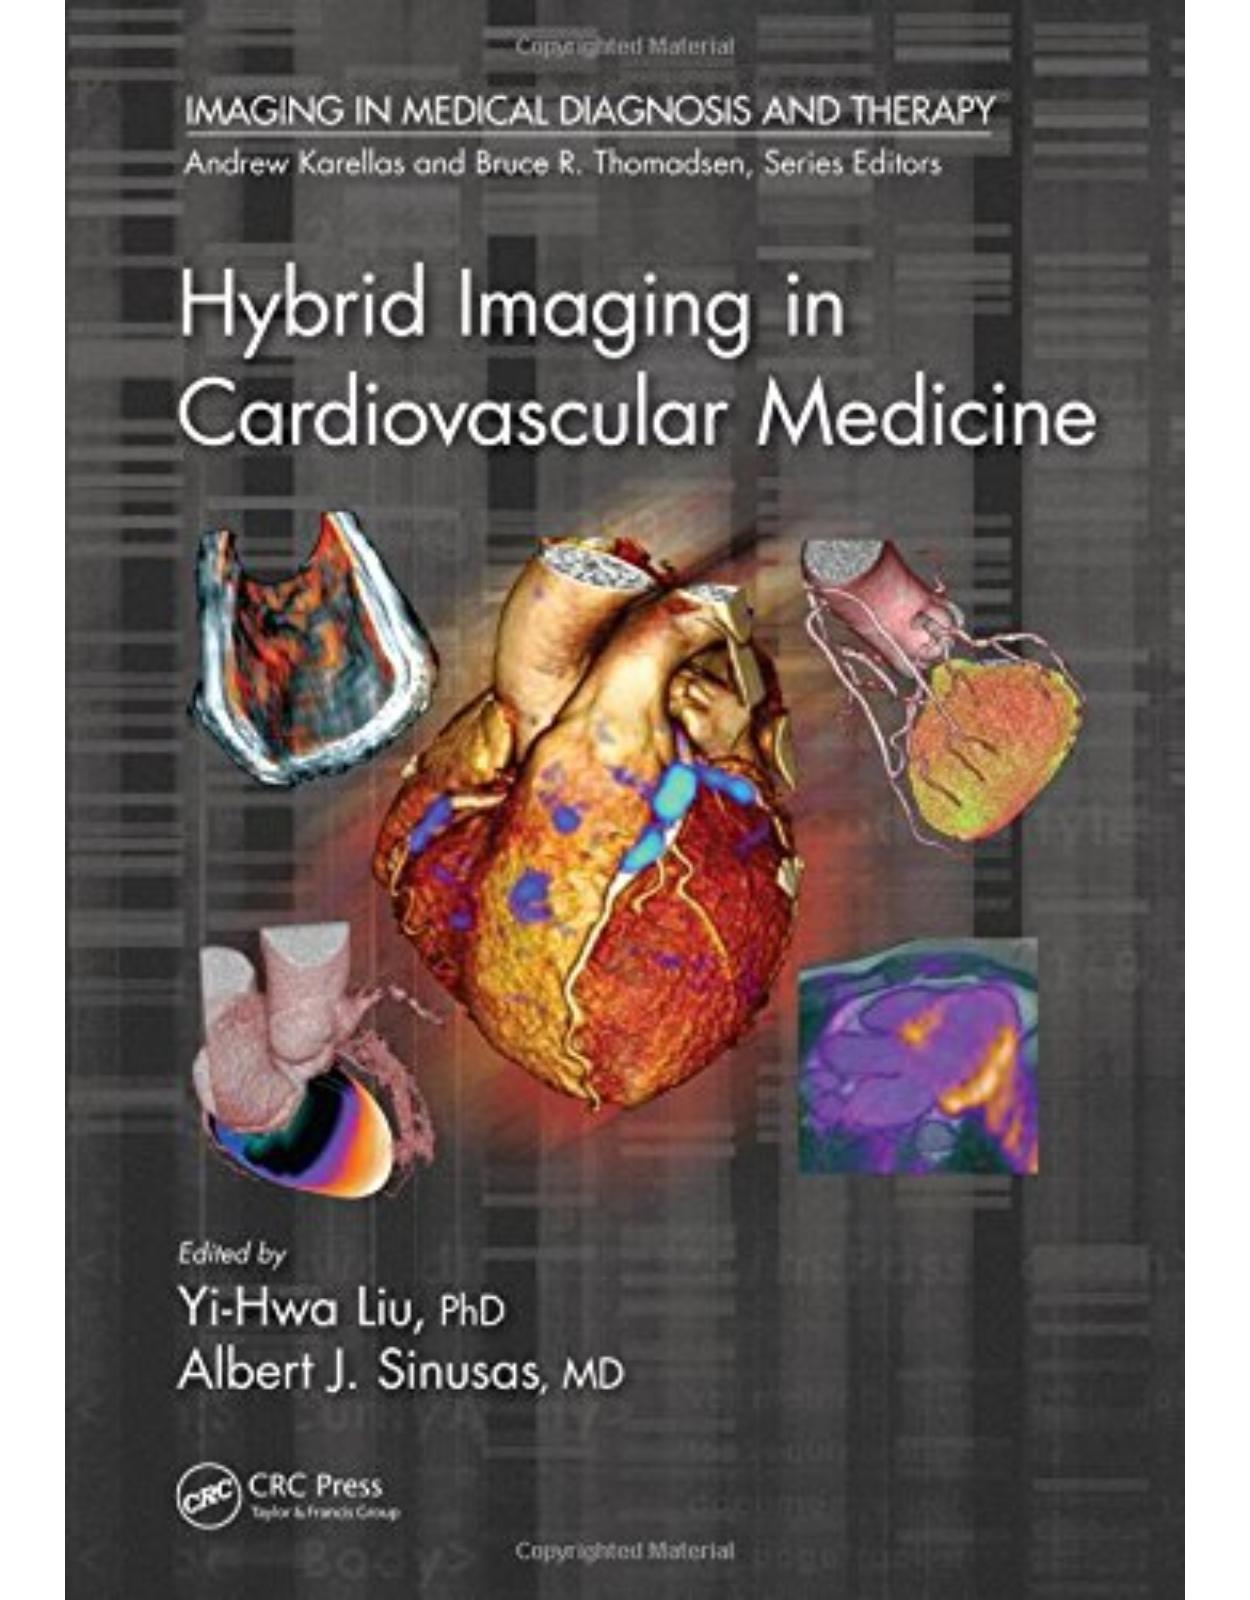 Hybrid Imaging in Cardiovascular Medicine (Imaging in Medical Diagnosis and Therapy) 